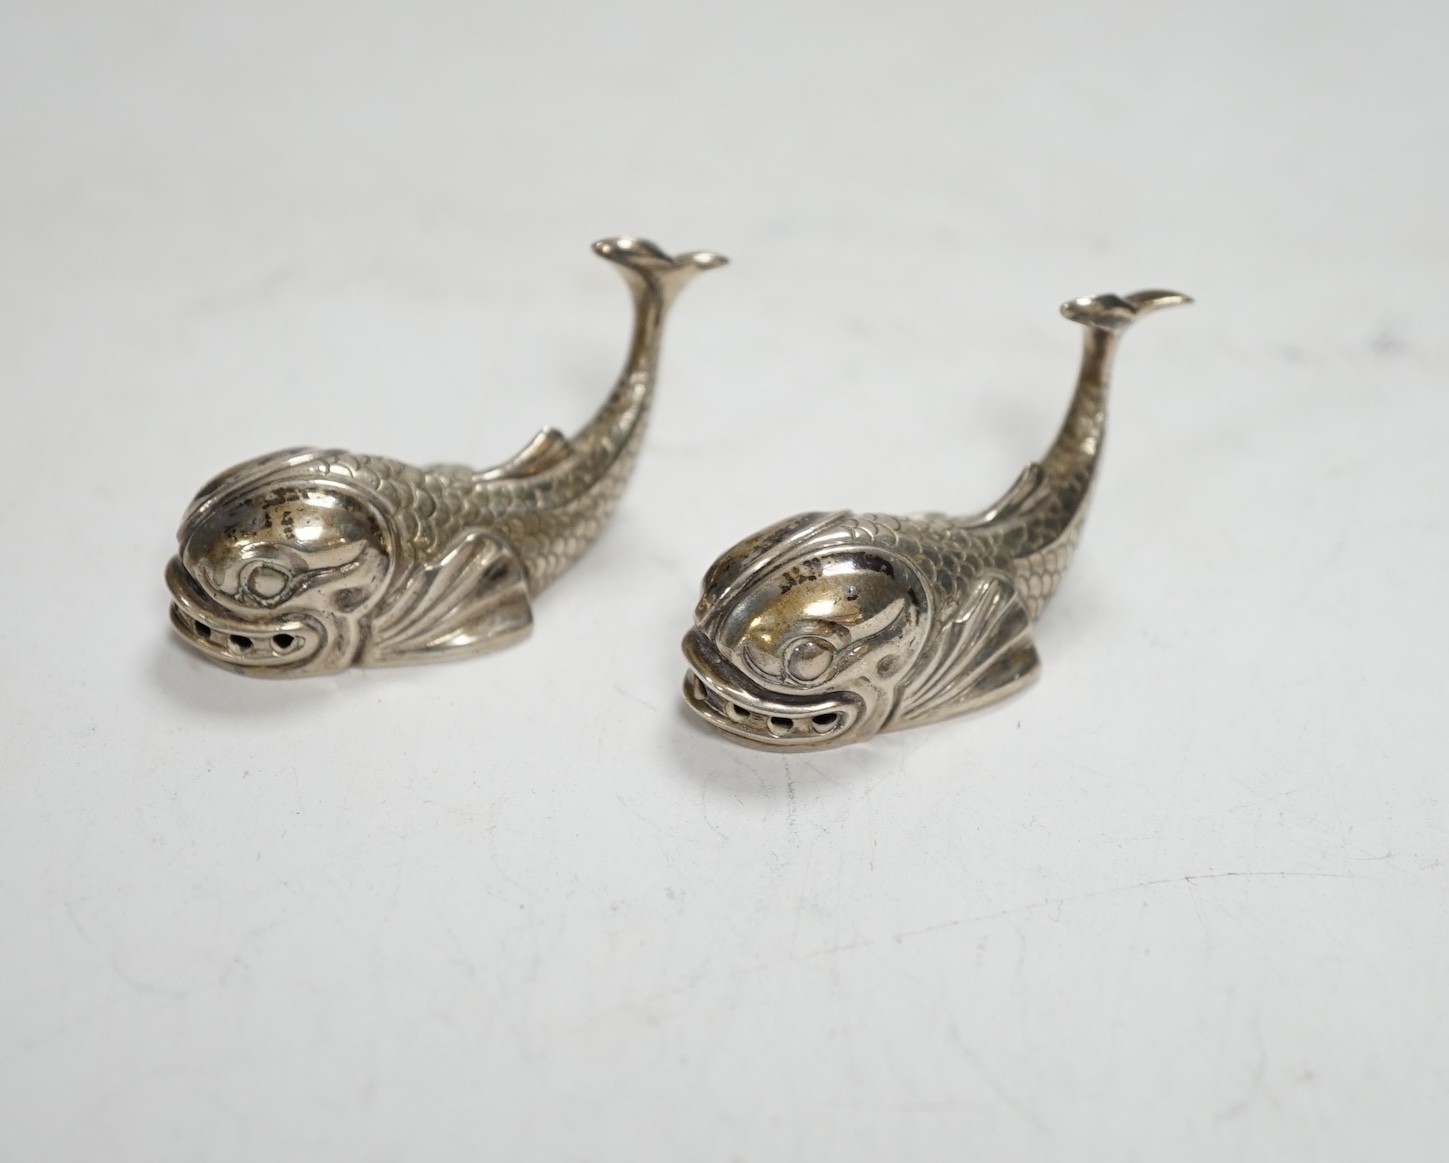 A pair of 20th century Italian Missiaglia 800 standard white metal novelty pepperettes, modelled as fish, length 42mm.